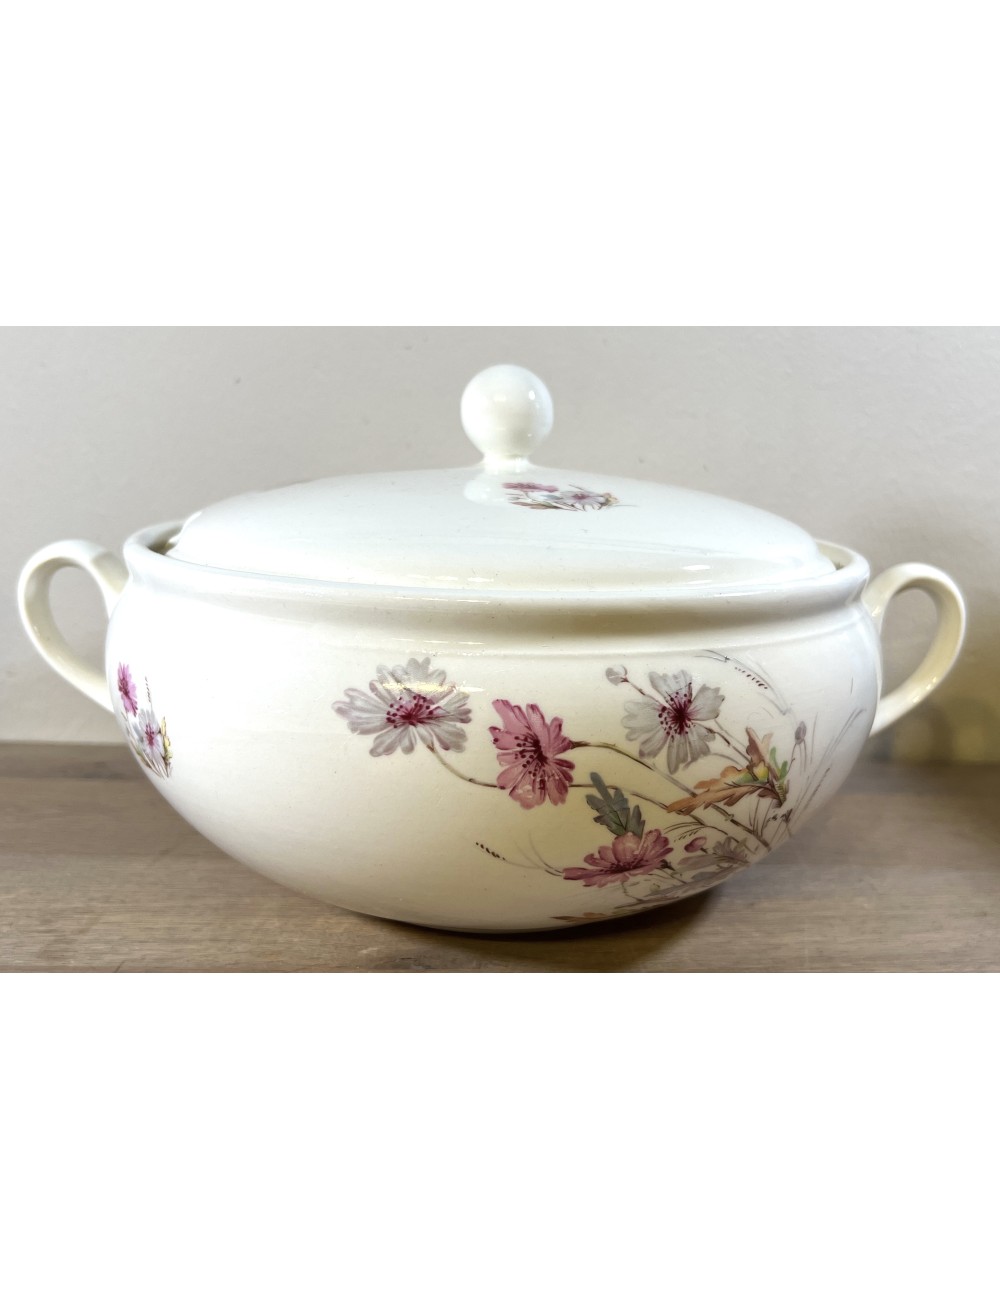 Cover dish / Soup tureen - Petrus Regout - model Desiree with a décor of gray/pink flowers